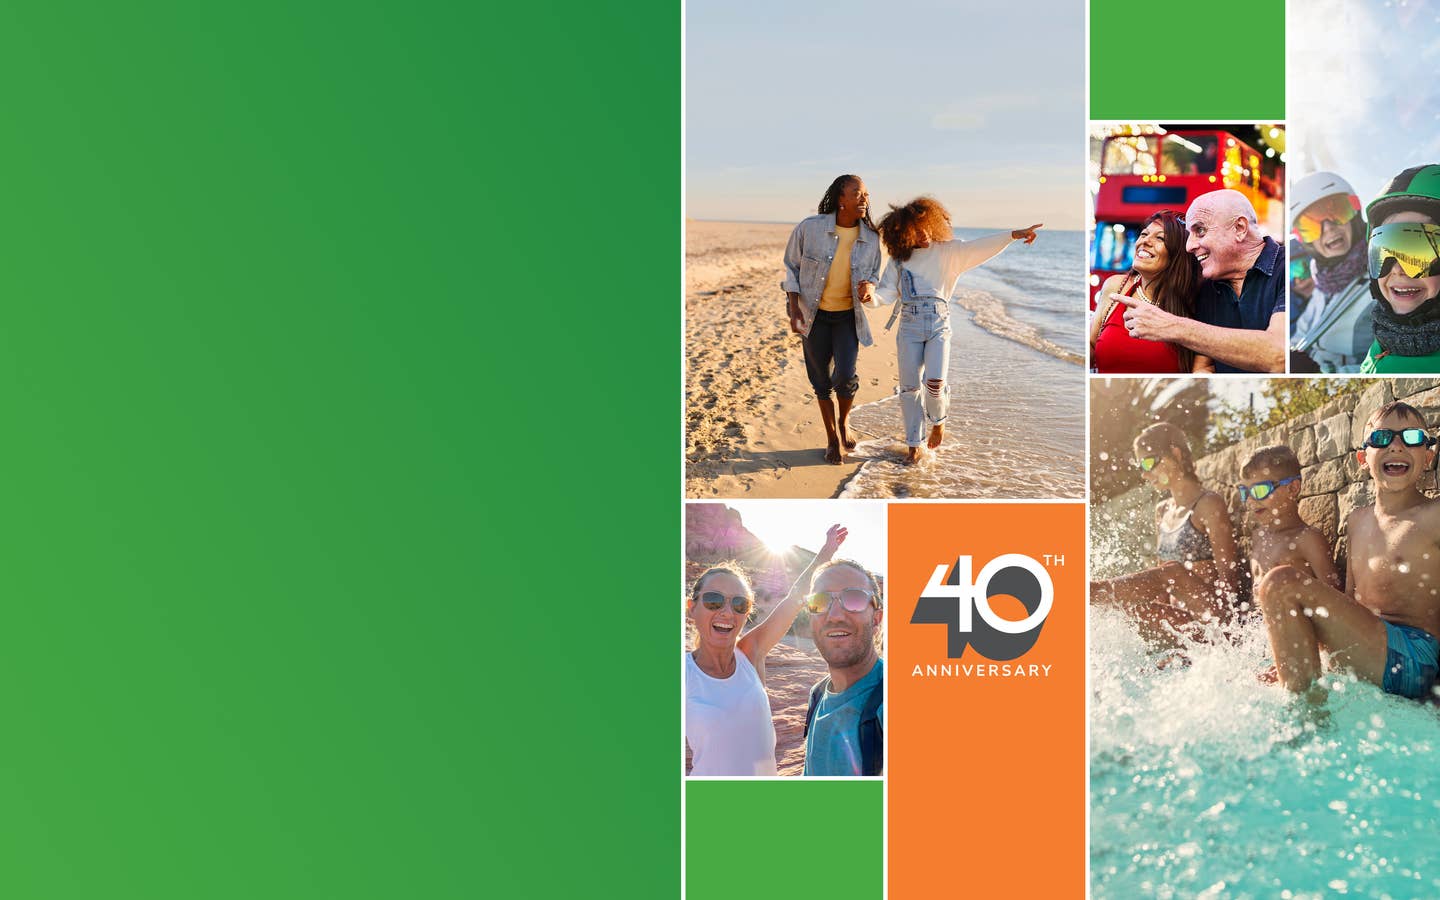 Green square and photo collage with people at beach, snowboarding, in Vegas, in the desert and at the pool with a 40th anniversary logo.